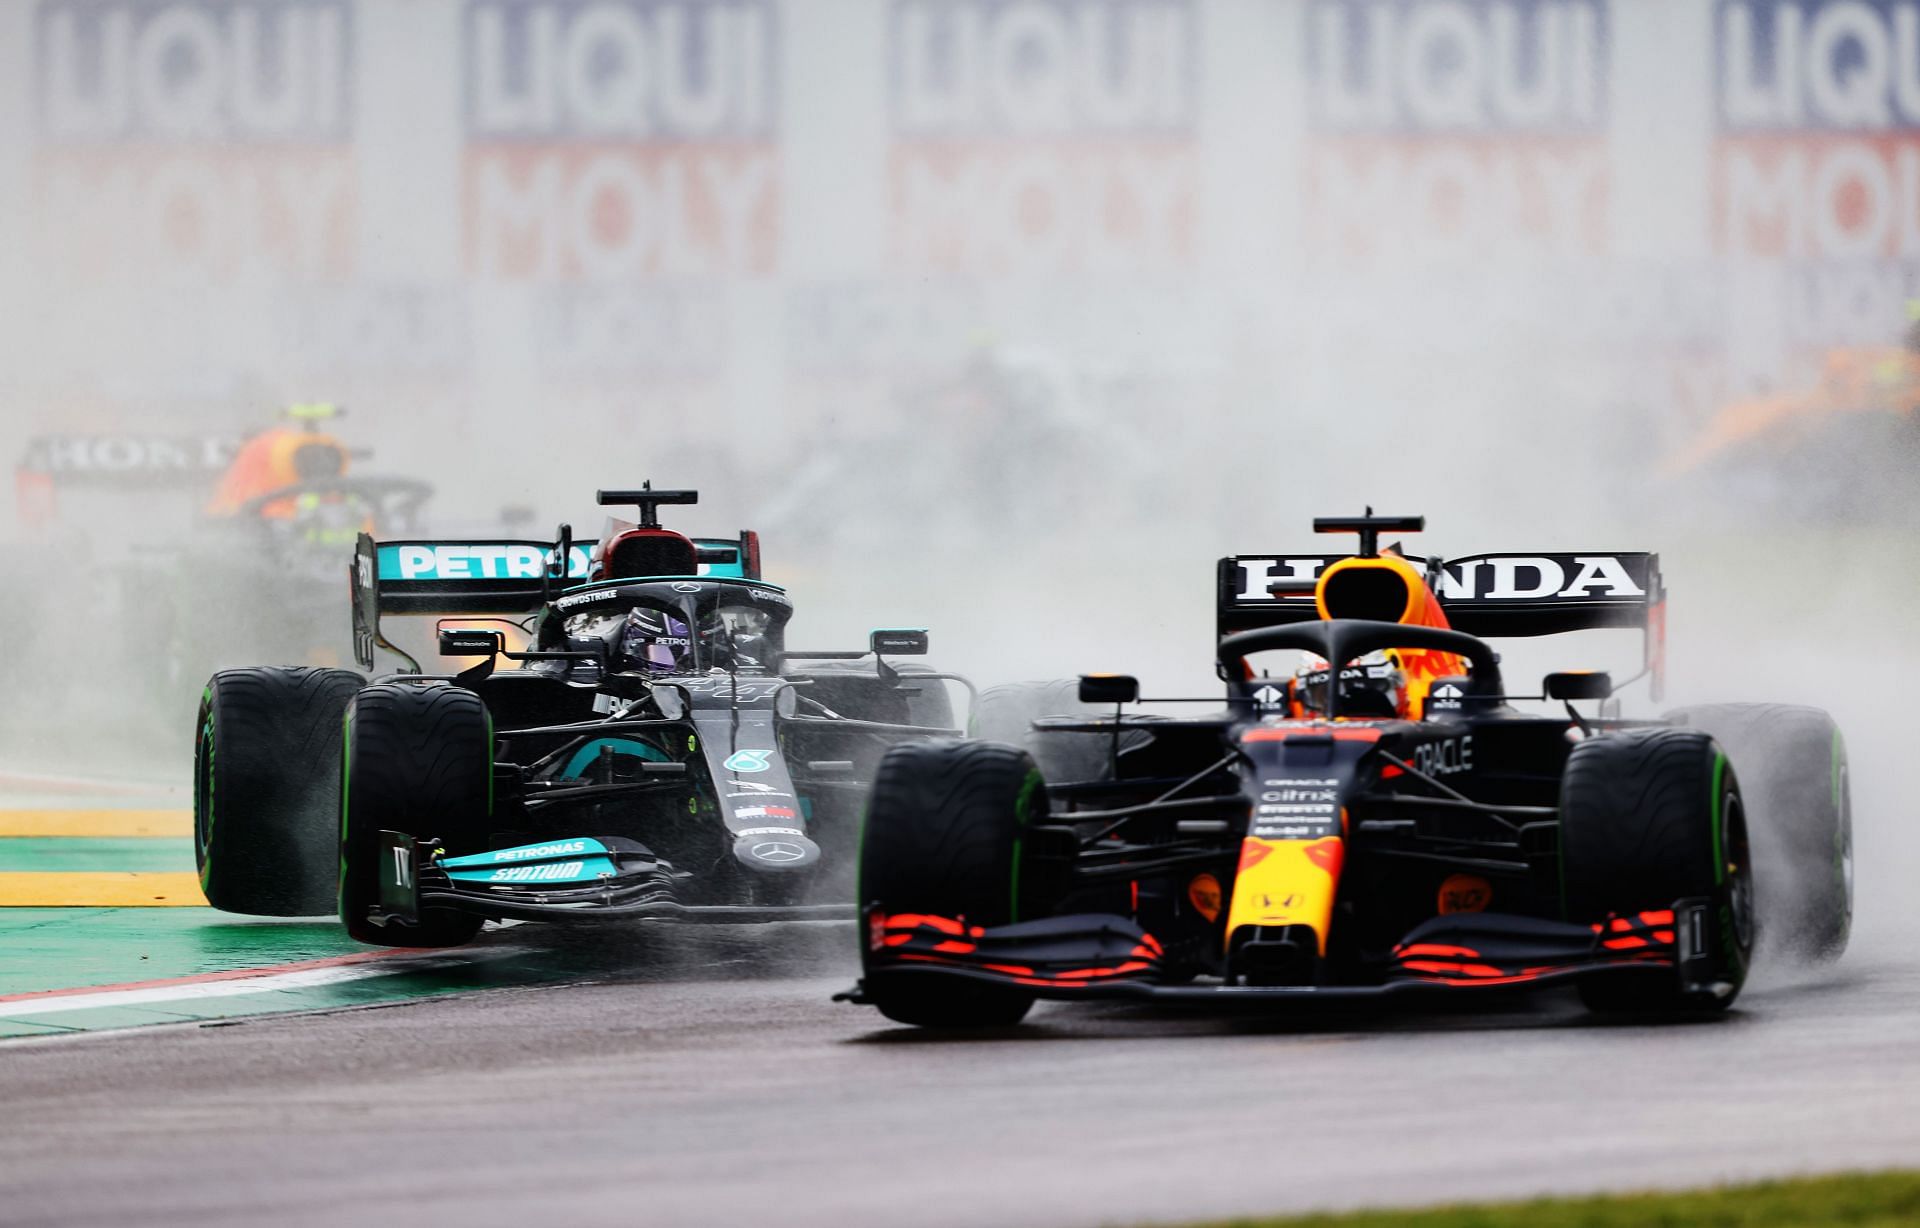 Lewis Hamilton (left) rides the kerb at Turn 1 to avoid colliding into Max Verstappen (right) at the 2021 Imola GP (Photo by Bryn Lennon/Getty Images)